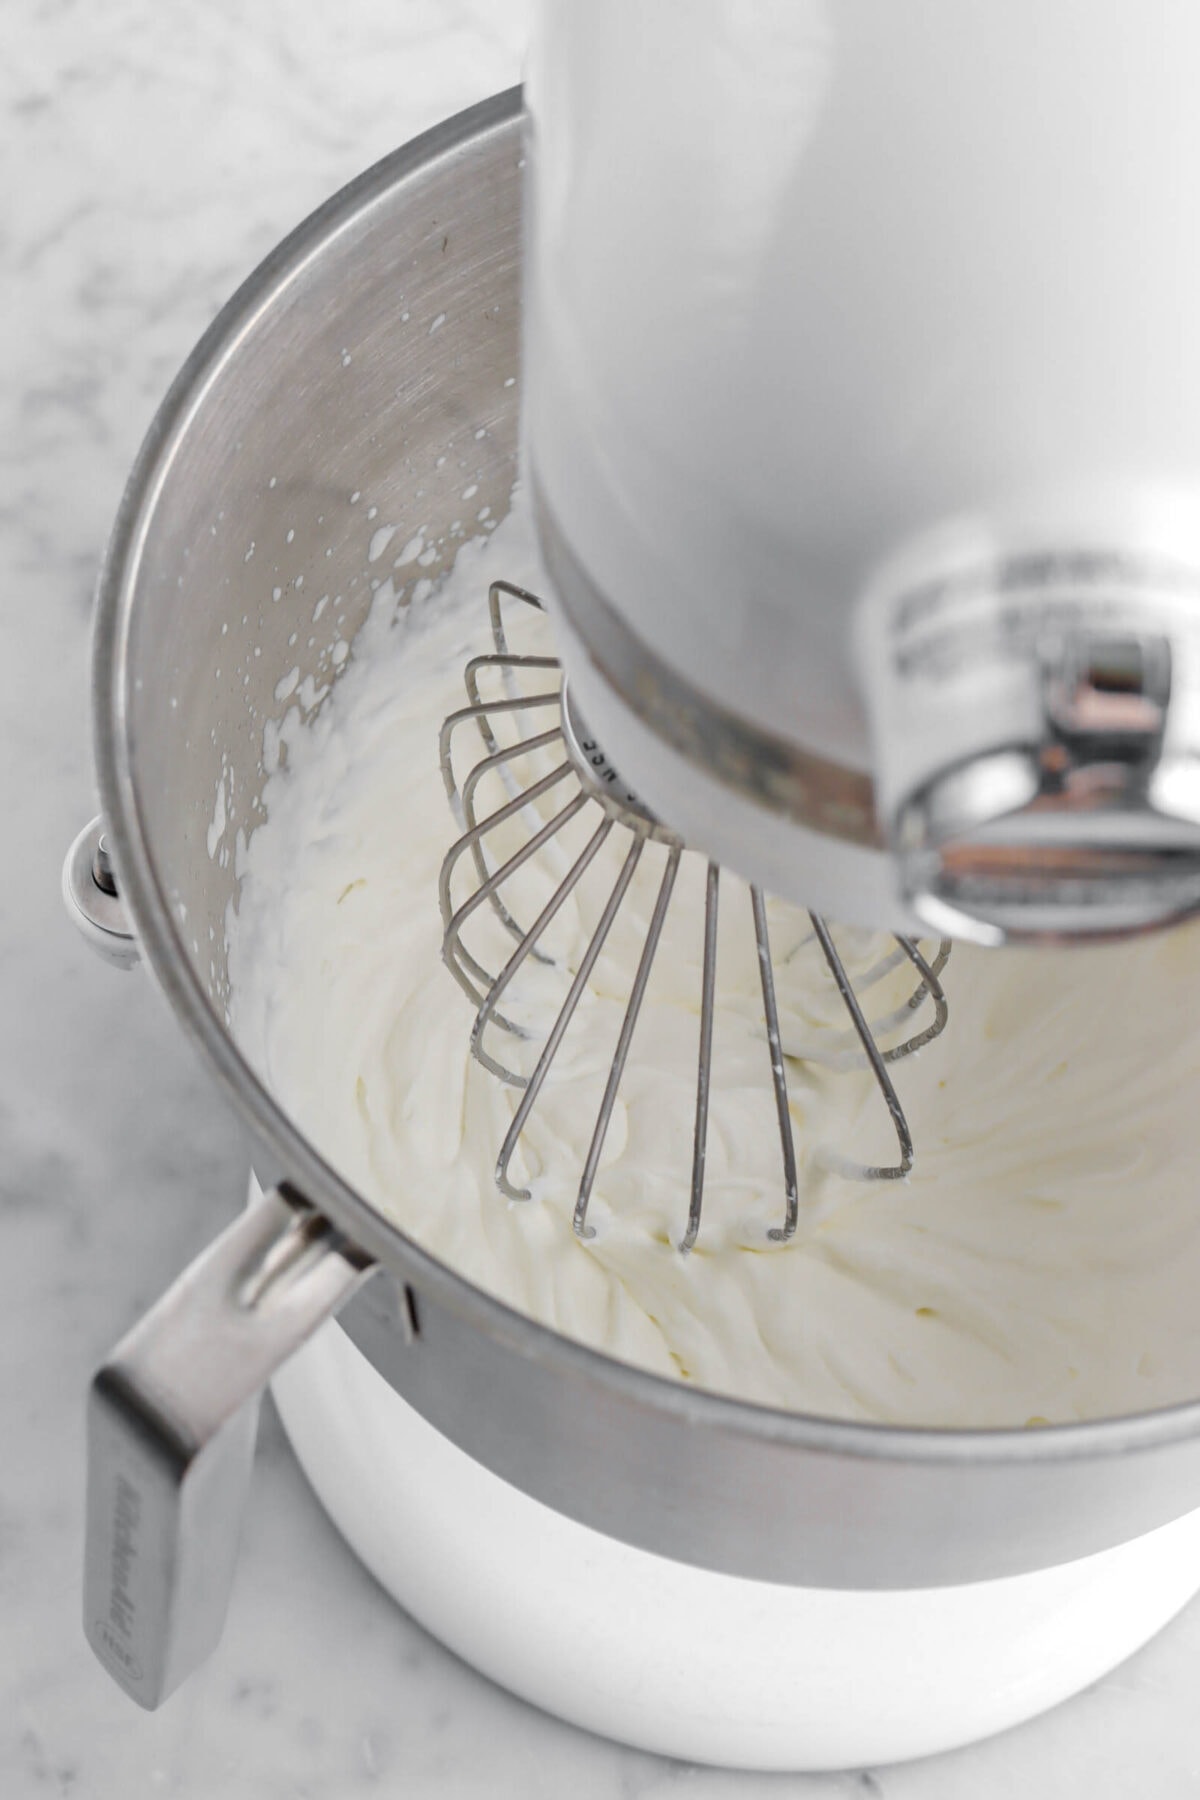 whipped cream in stand mixer.